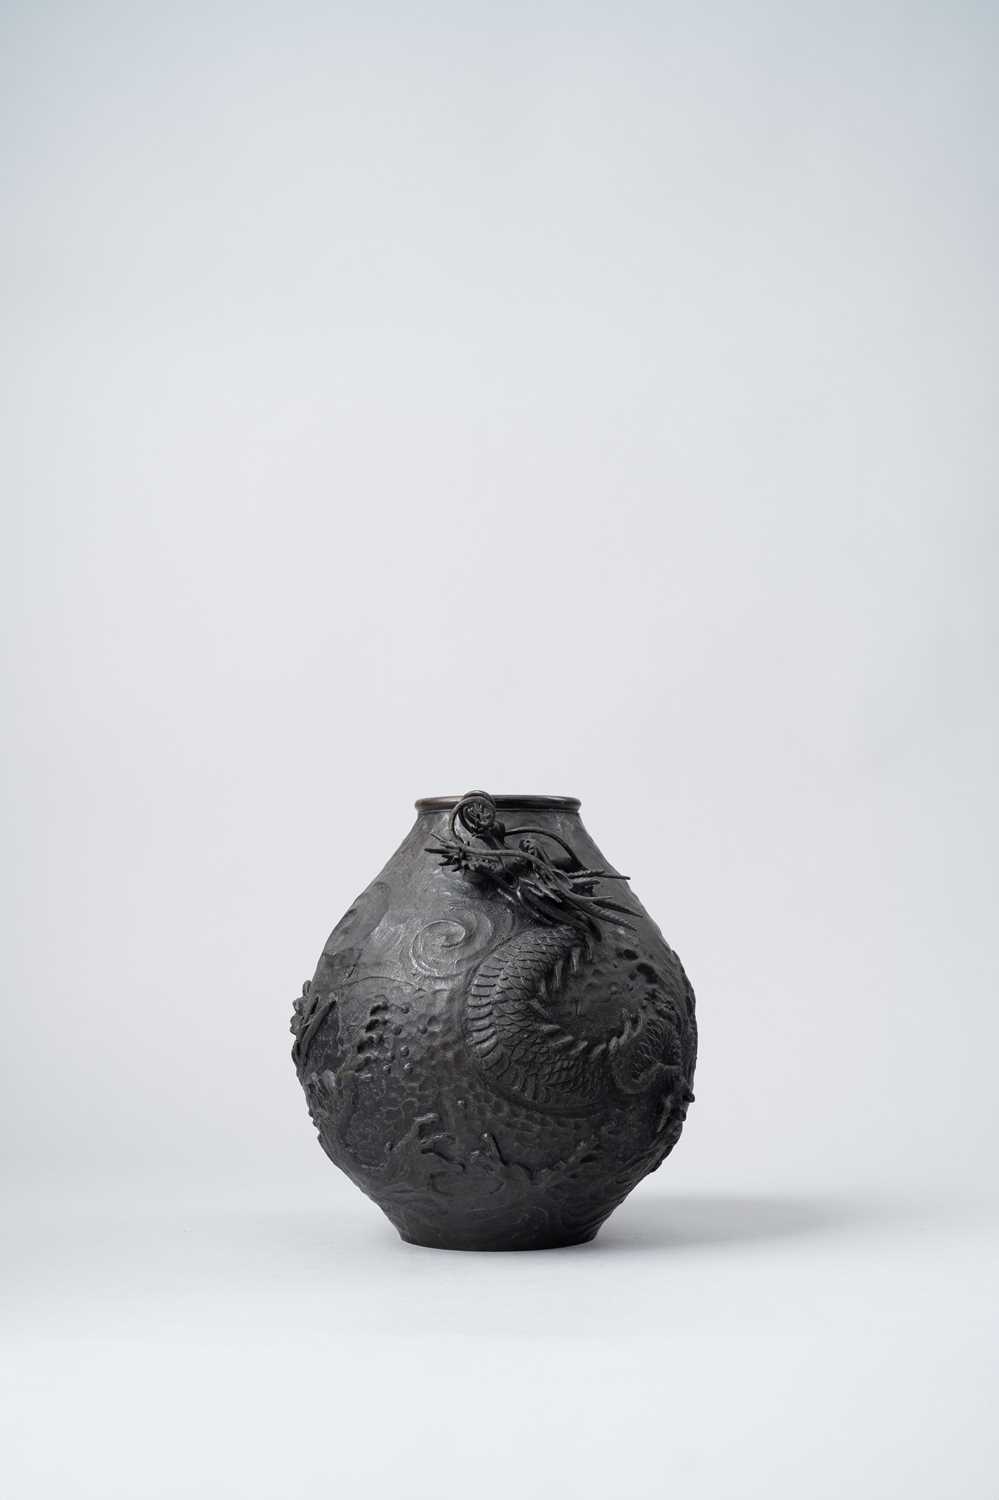 A JAPANESE BRONZE VASE MEIJI ERA, 19TH/20TH CENTURY The pear-shaped body decorated with a large